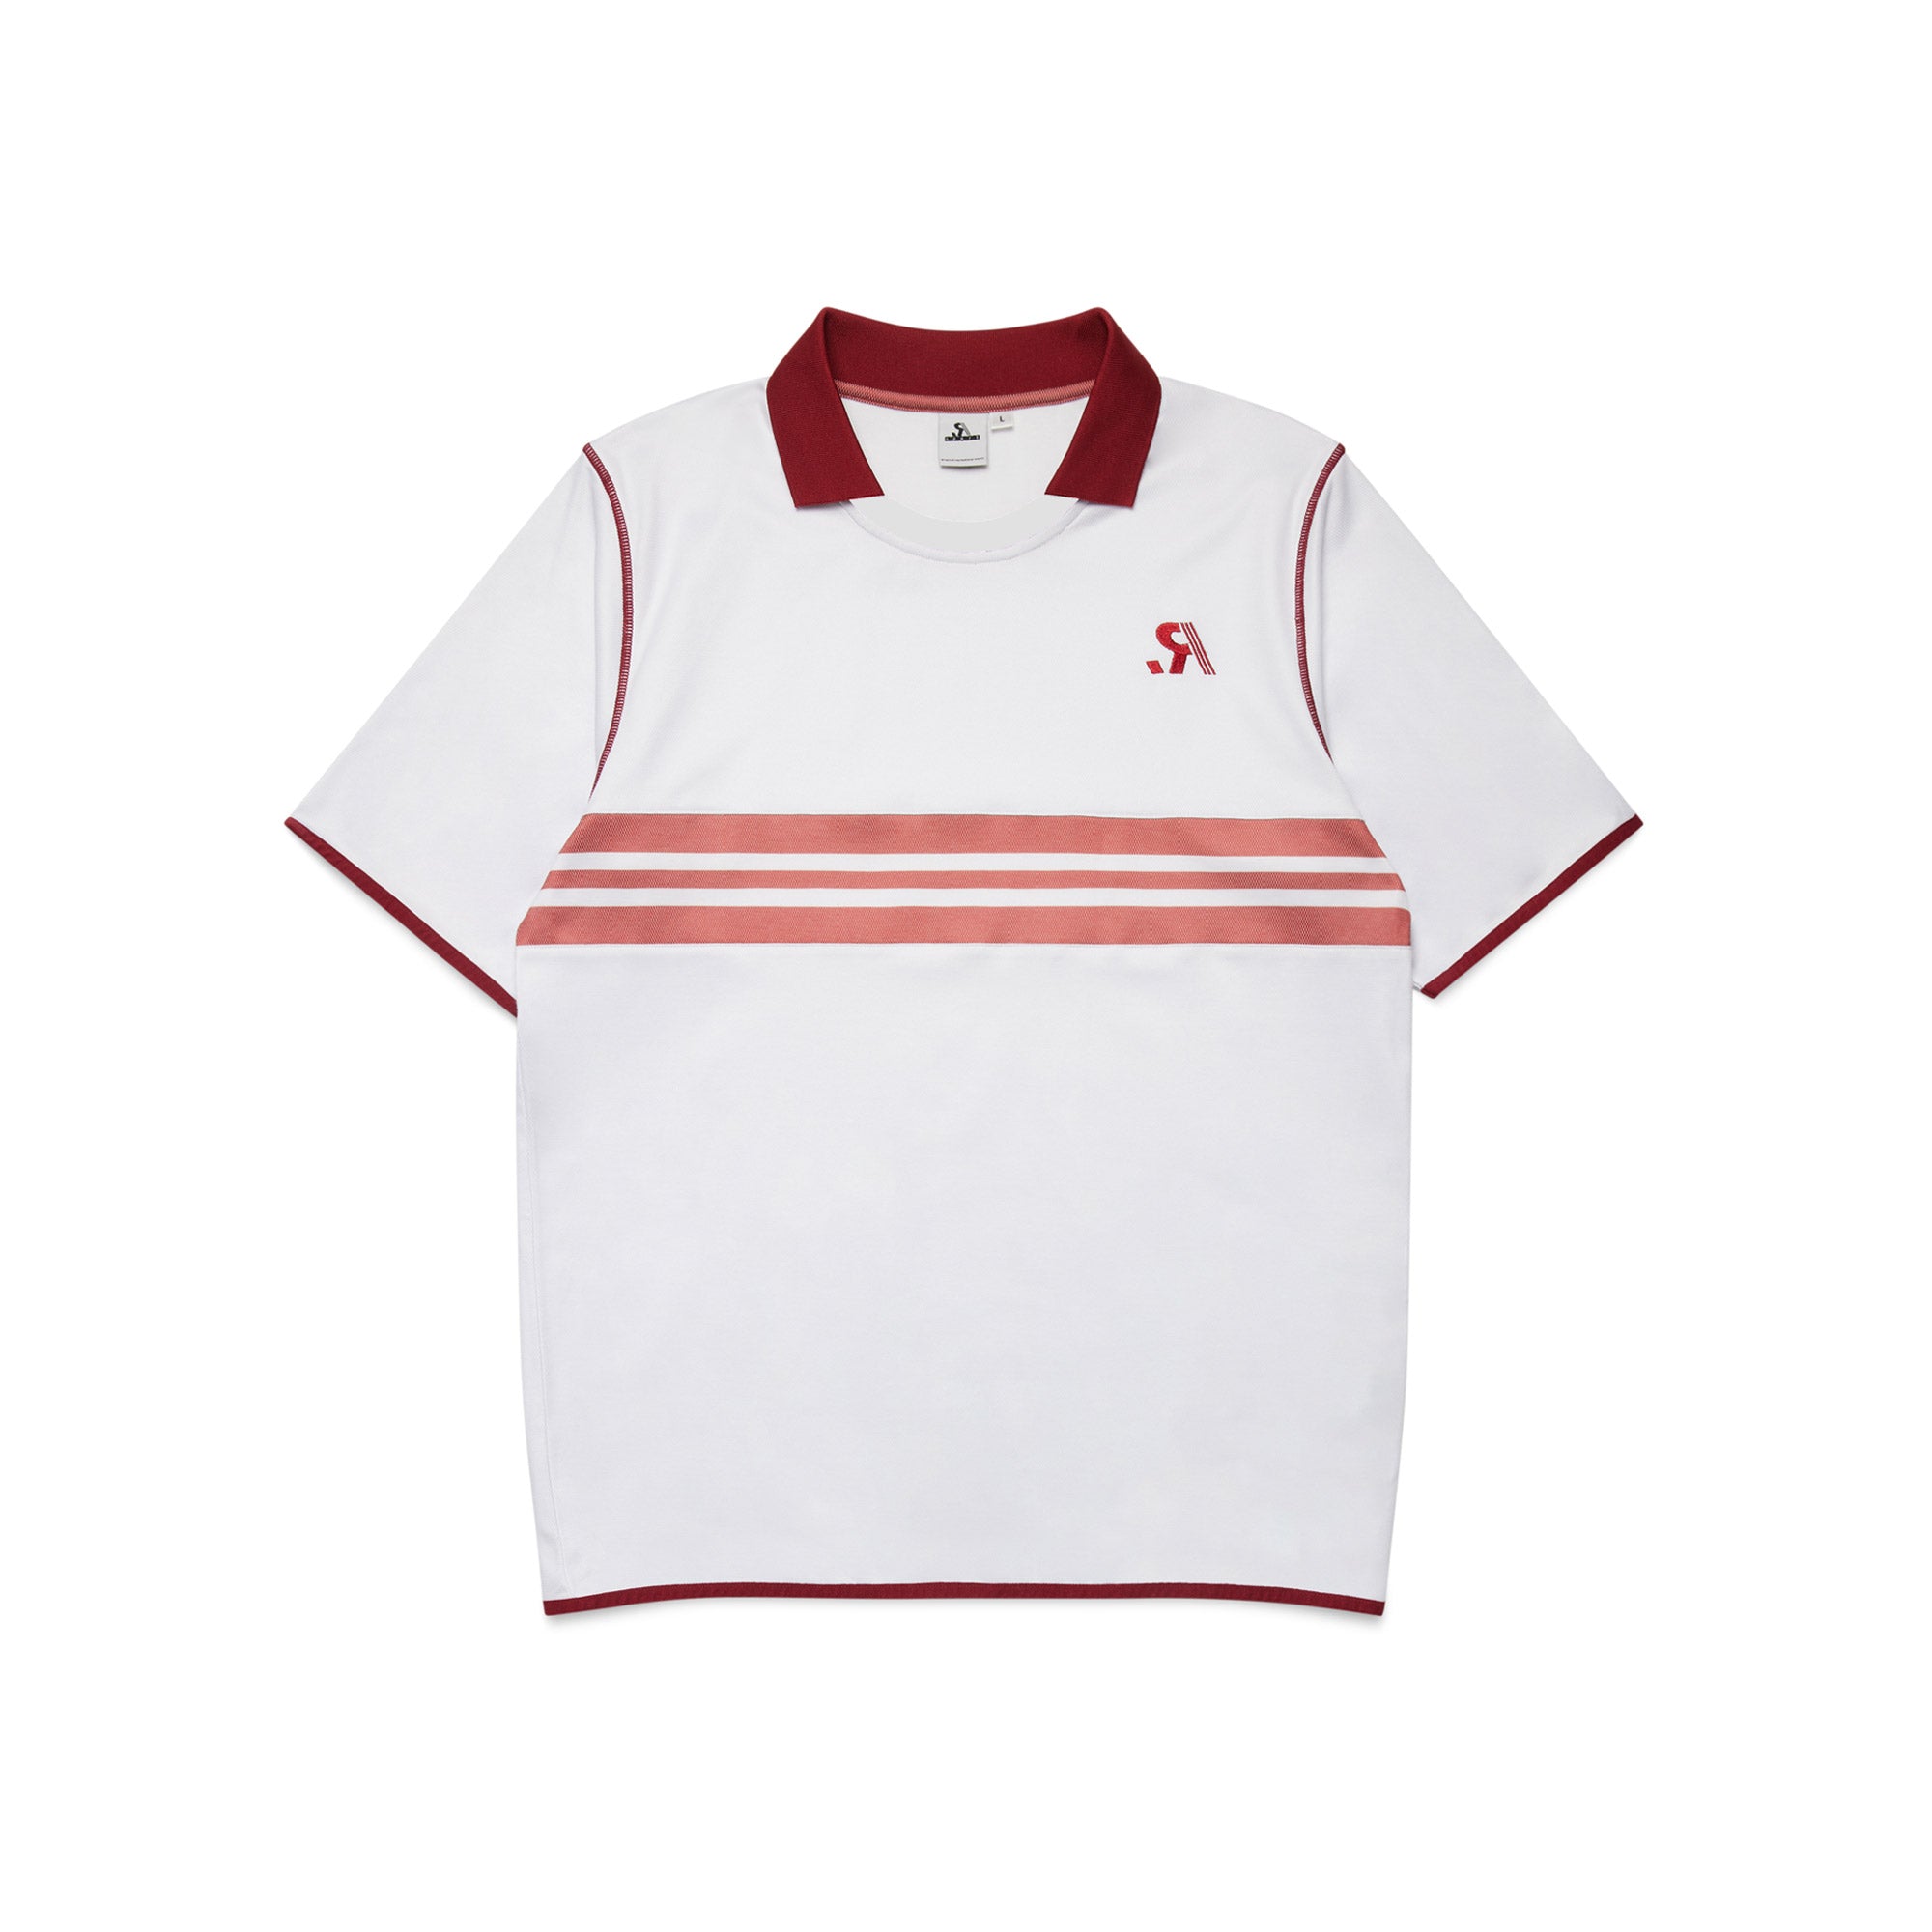 R.SPORT Tennis Polo Top - White/Red